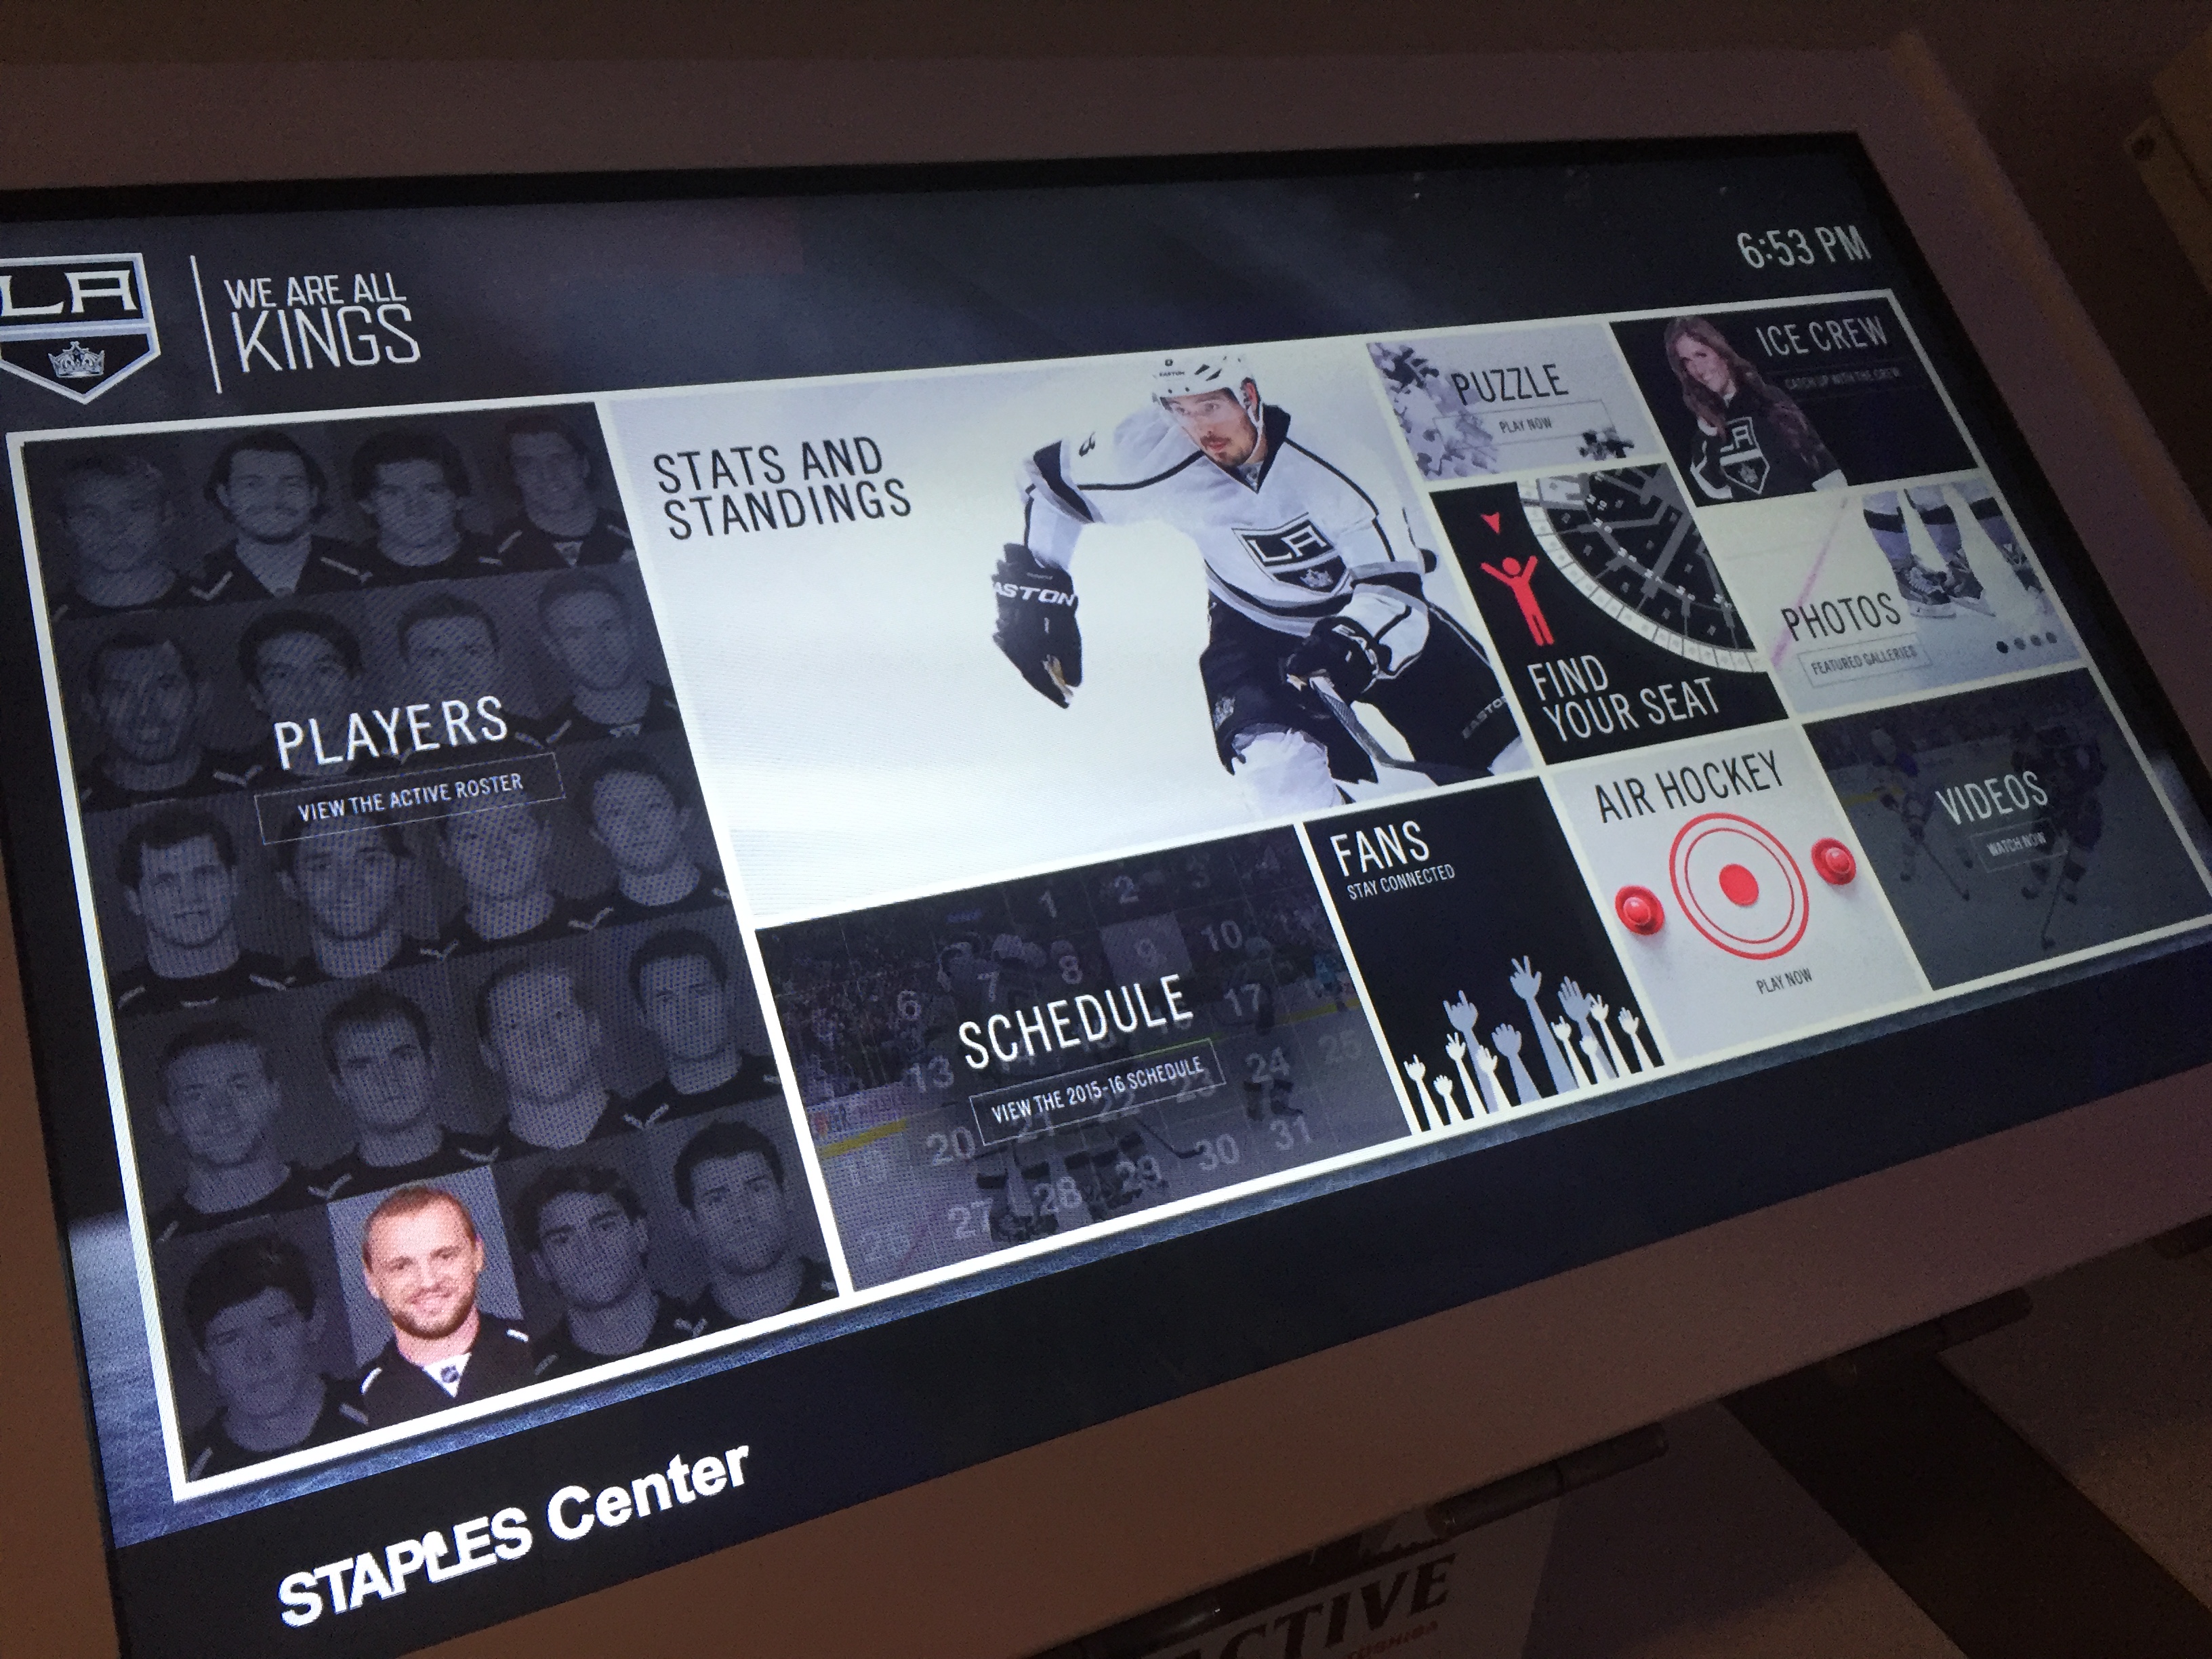 Digital touch screens with air hockey, schedule, mascot puzzle and more